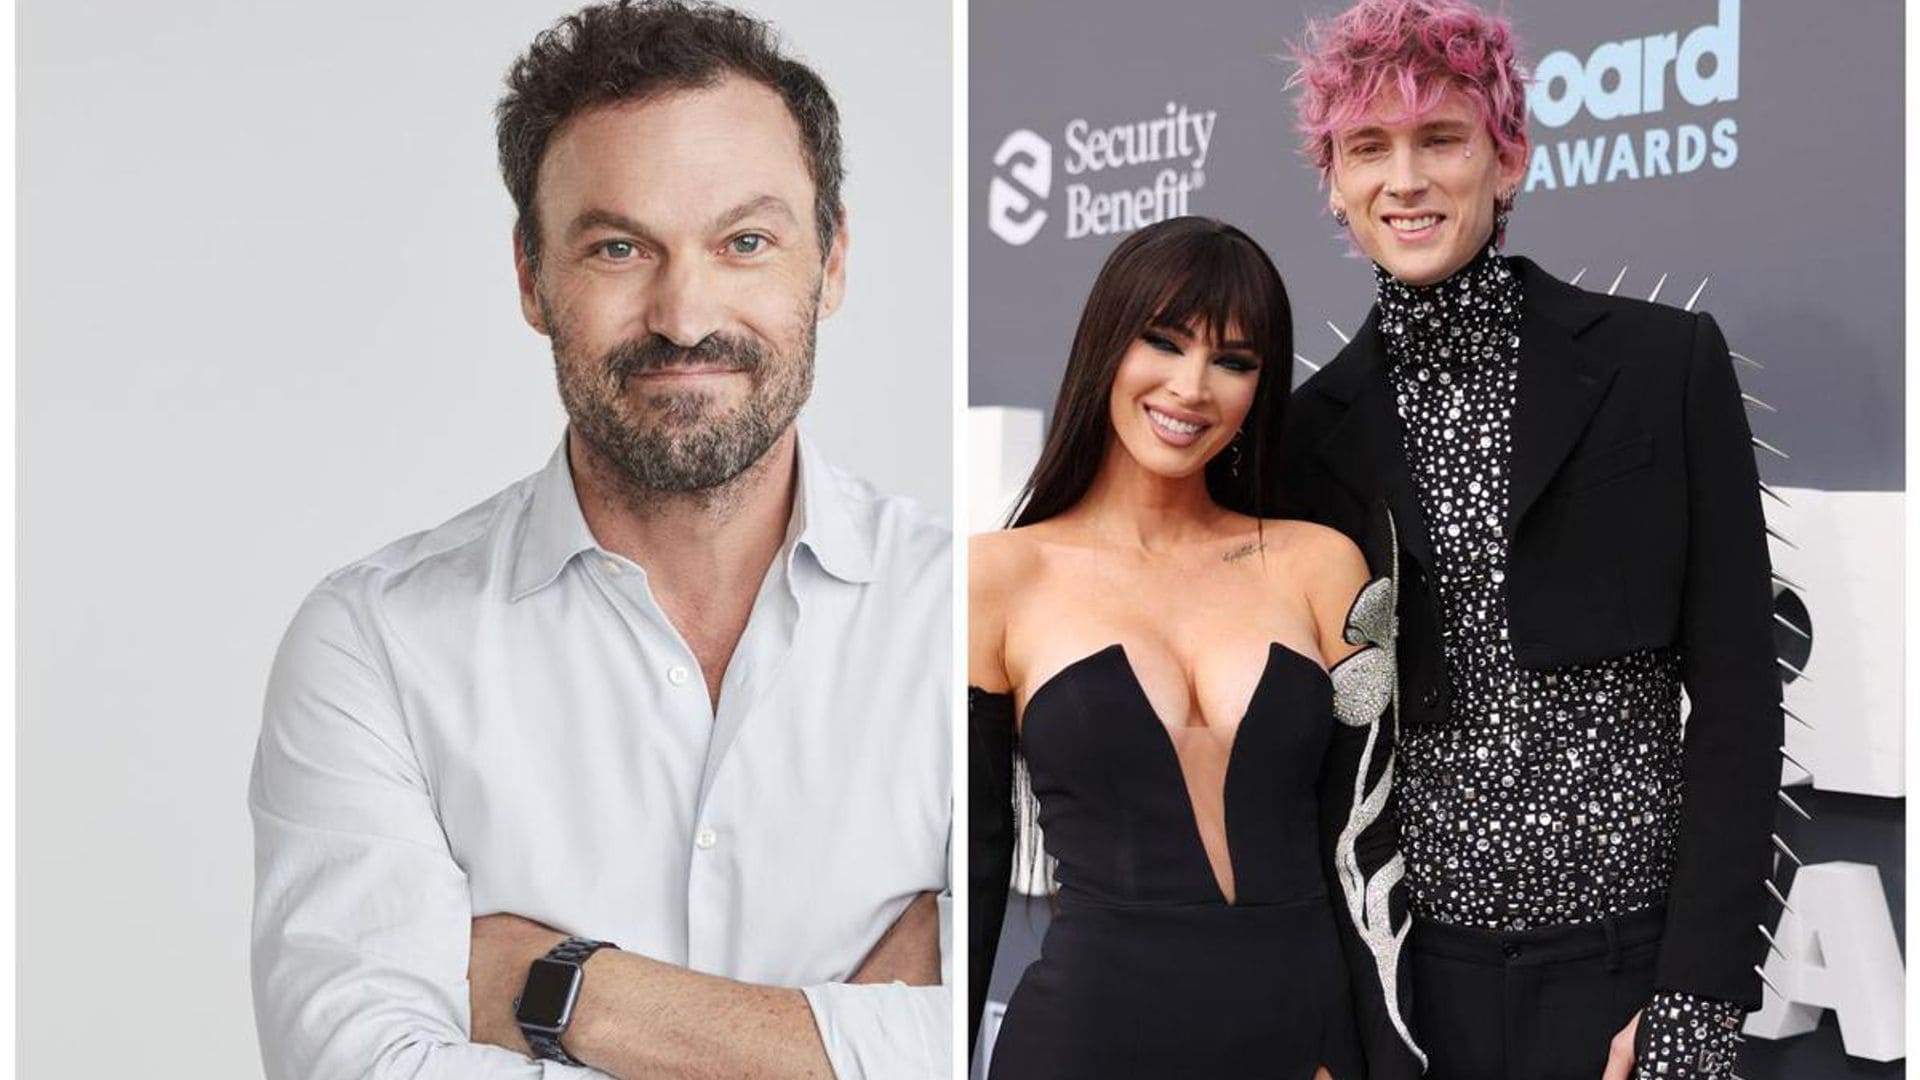 Brian Austin Green encourages Megan Fox to have a baby with Machine Gun Kelly: ‘That’d be amazing’